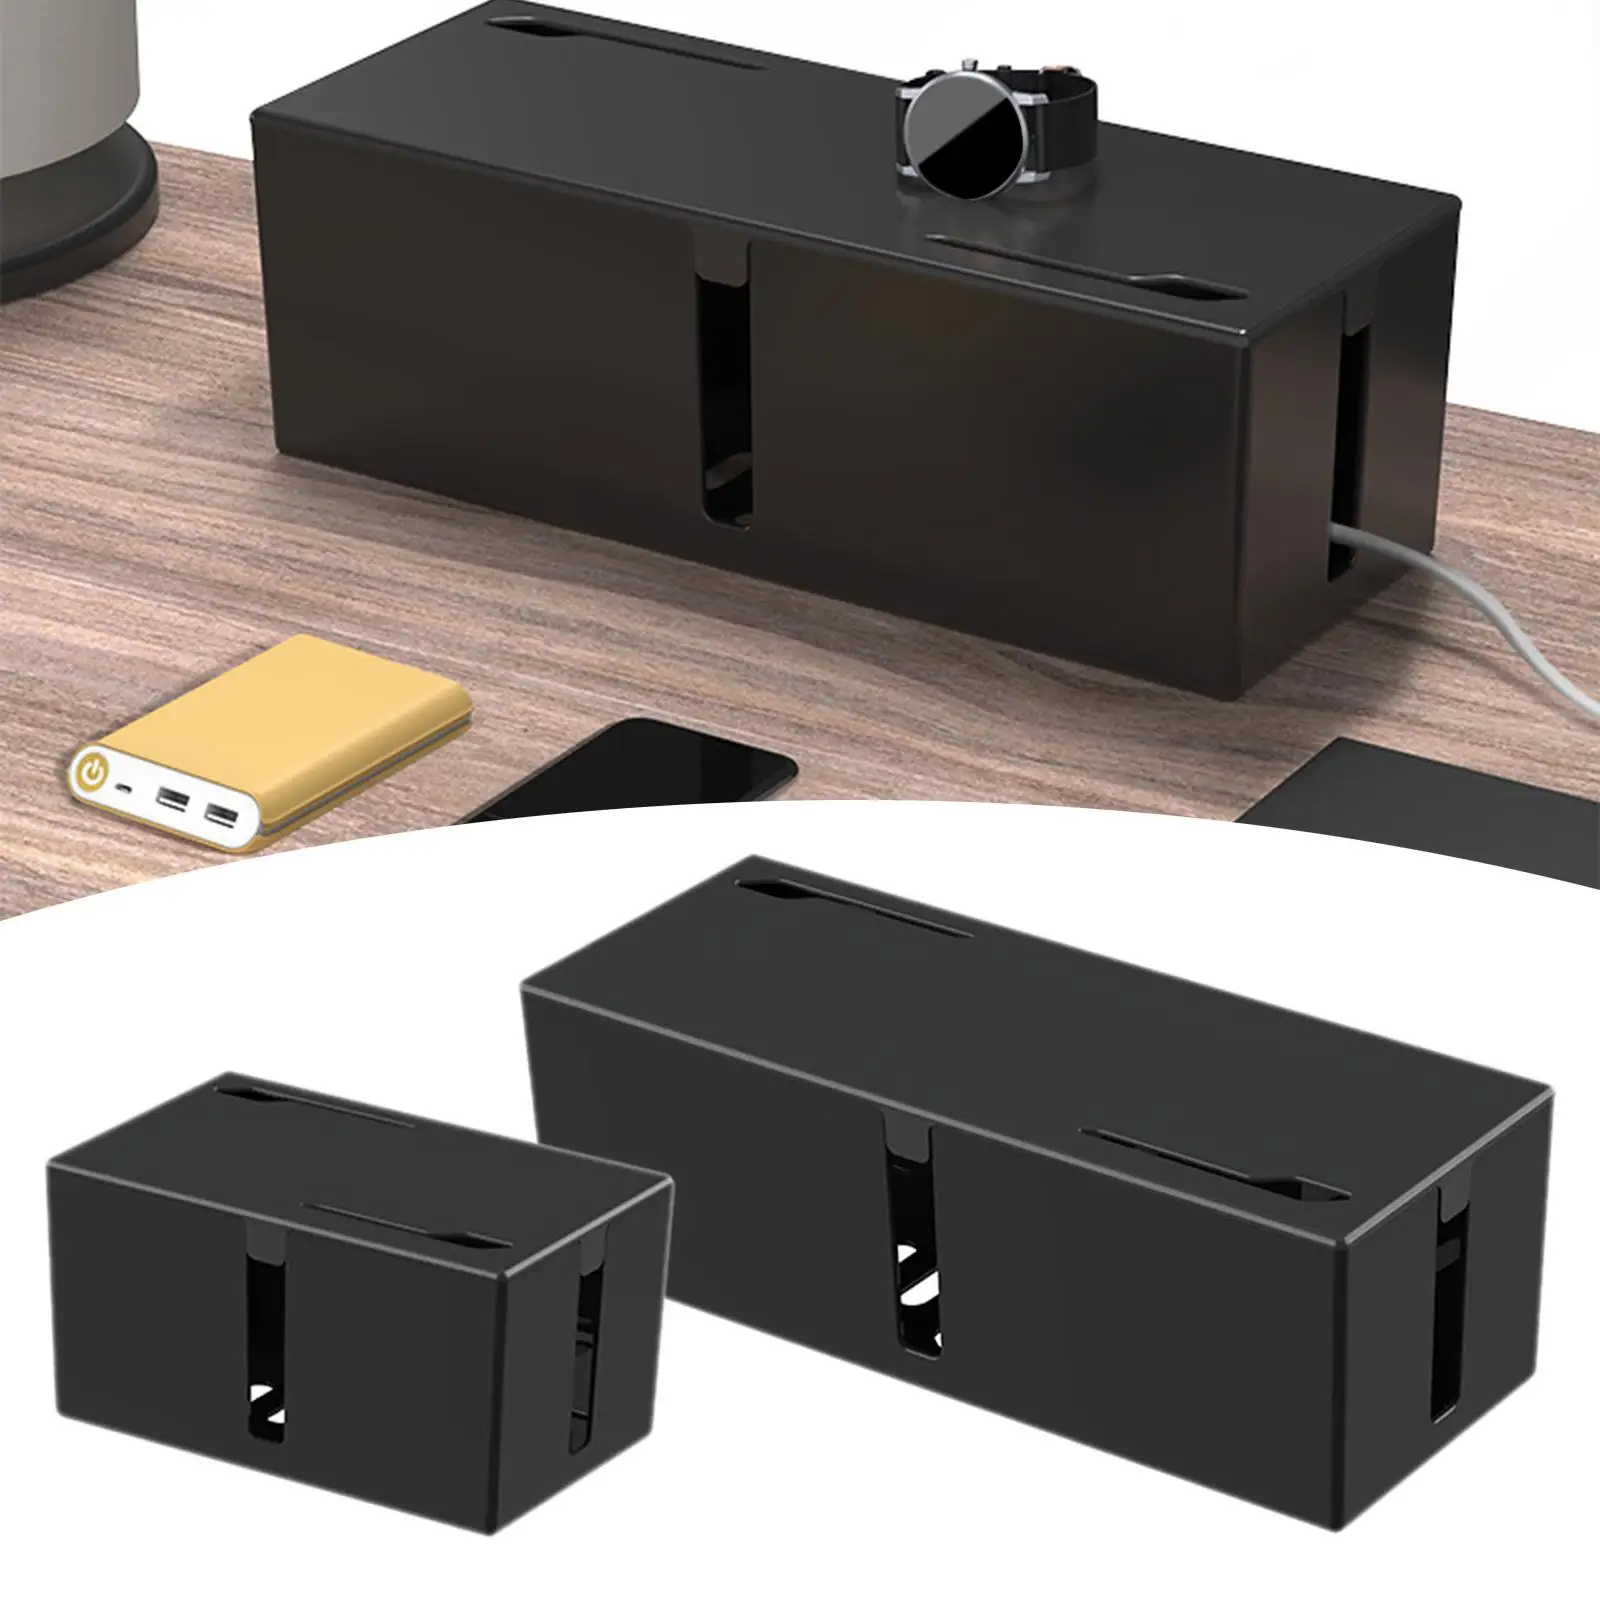 Cable Organizer Box Hide Wires & Power Strip Desk Cable Management solution Cord Organization Power Strip Box for Desk Home TV